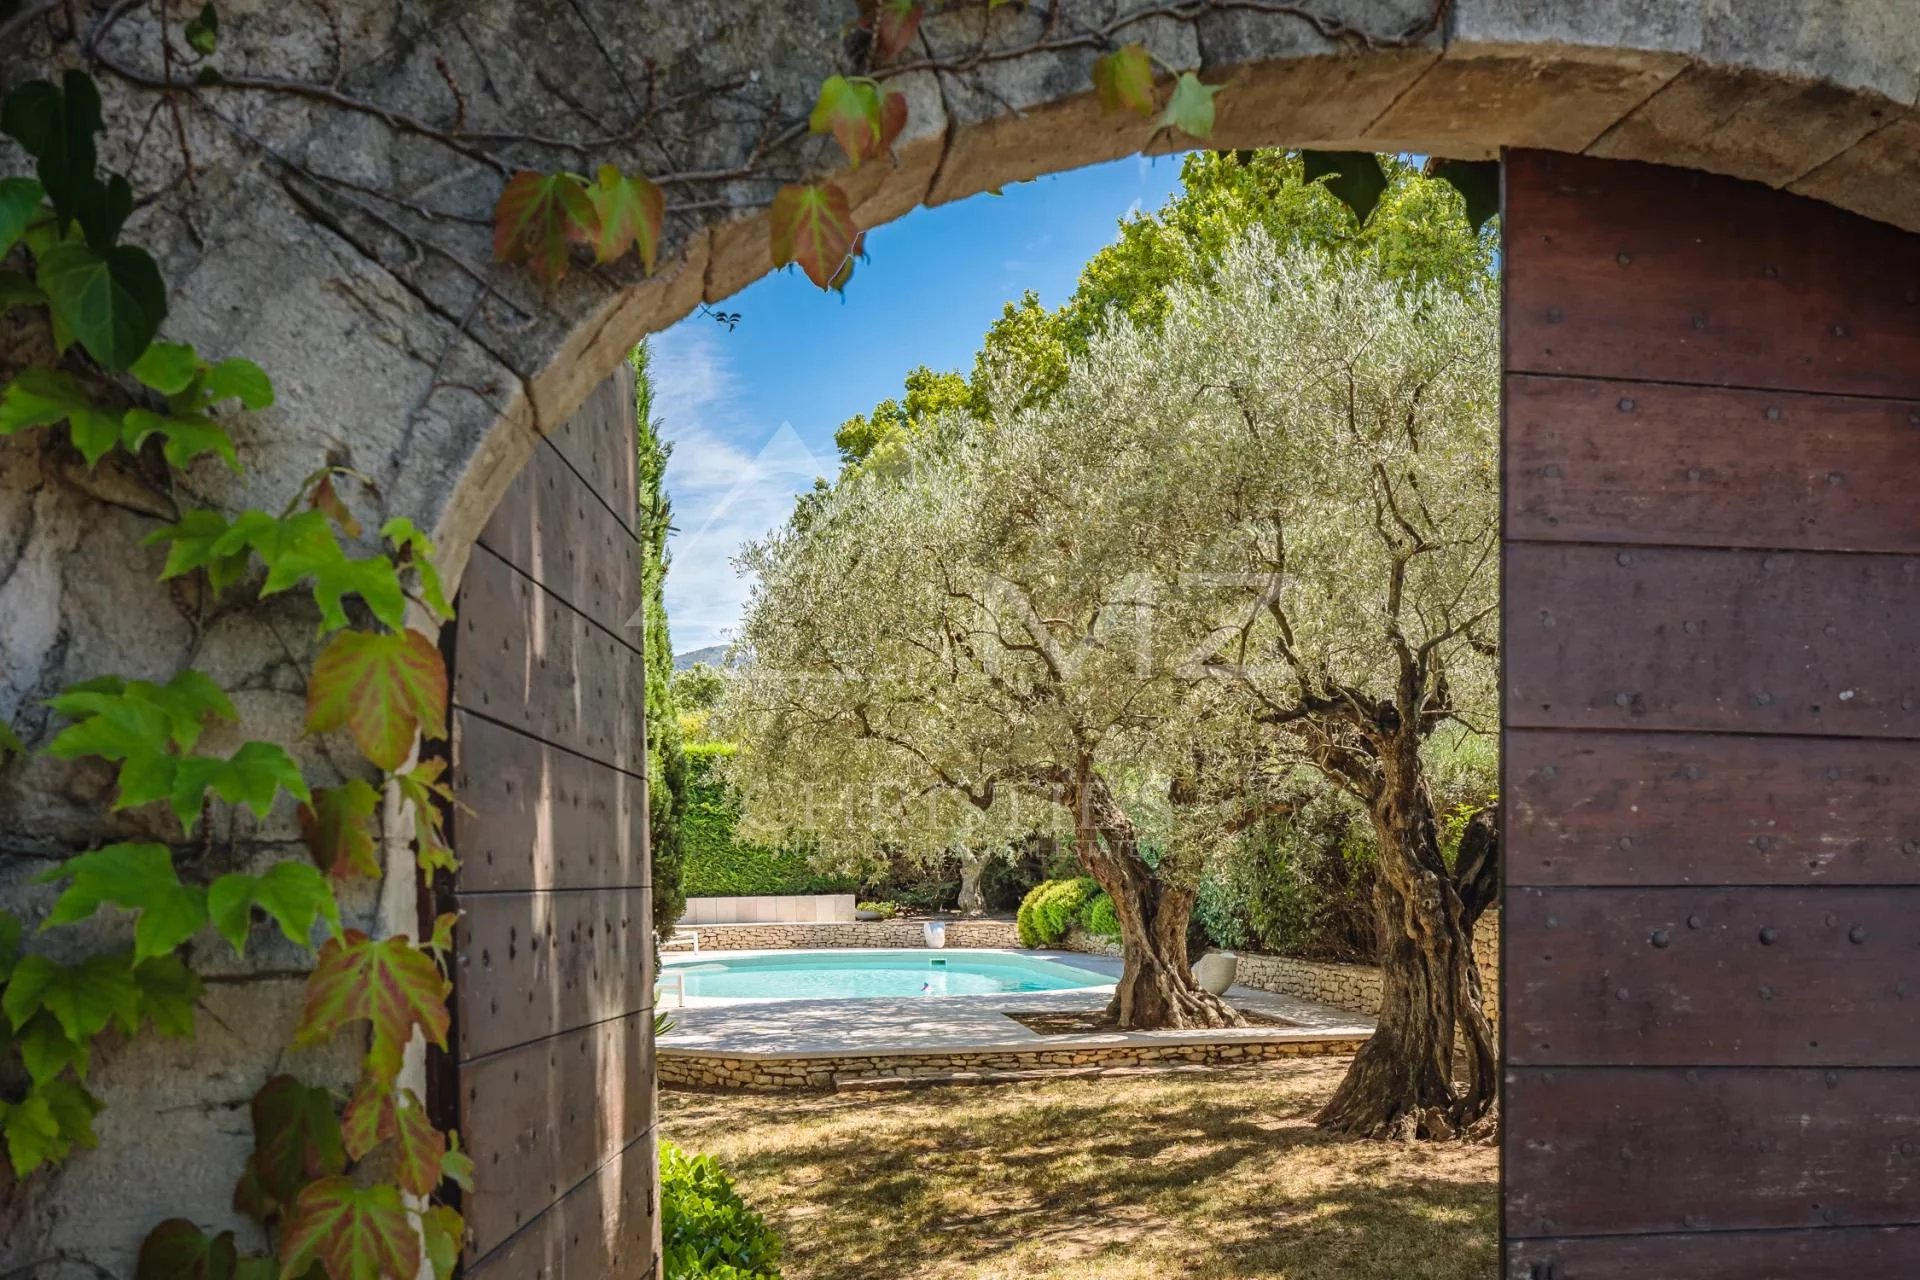 Luberon - Charming stone built house with pool